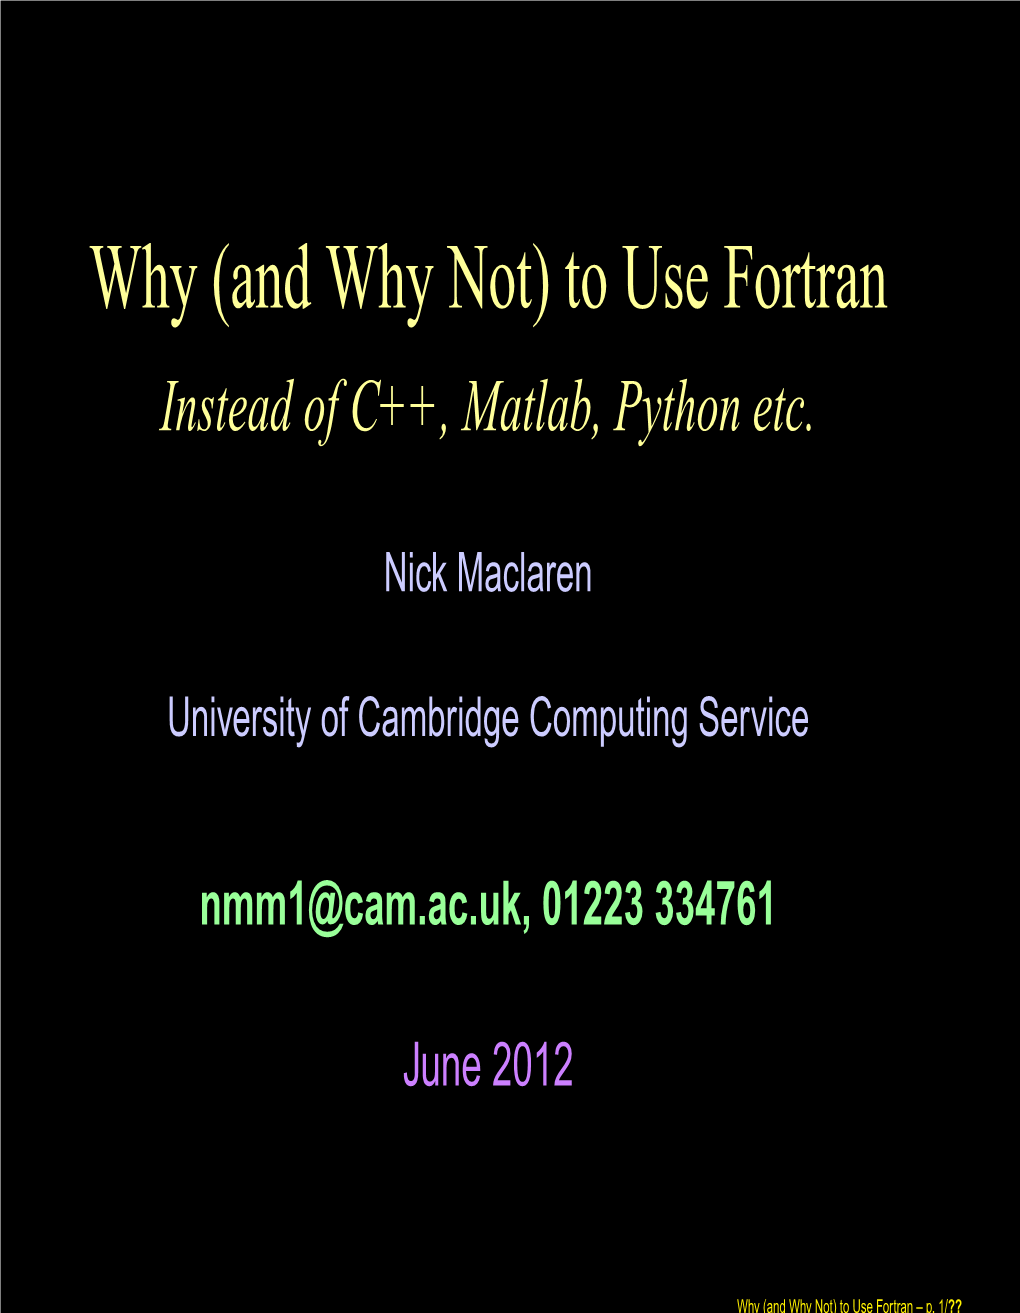 Why (And Why Not) to Use Fortran Instead of C++, Matlab, Python Etc